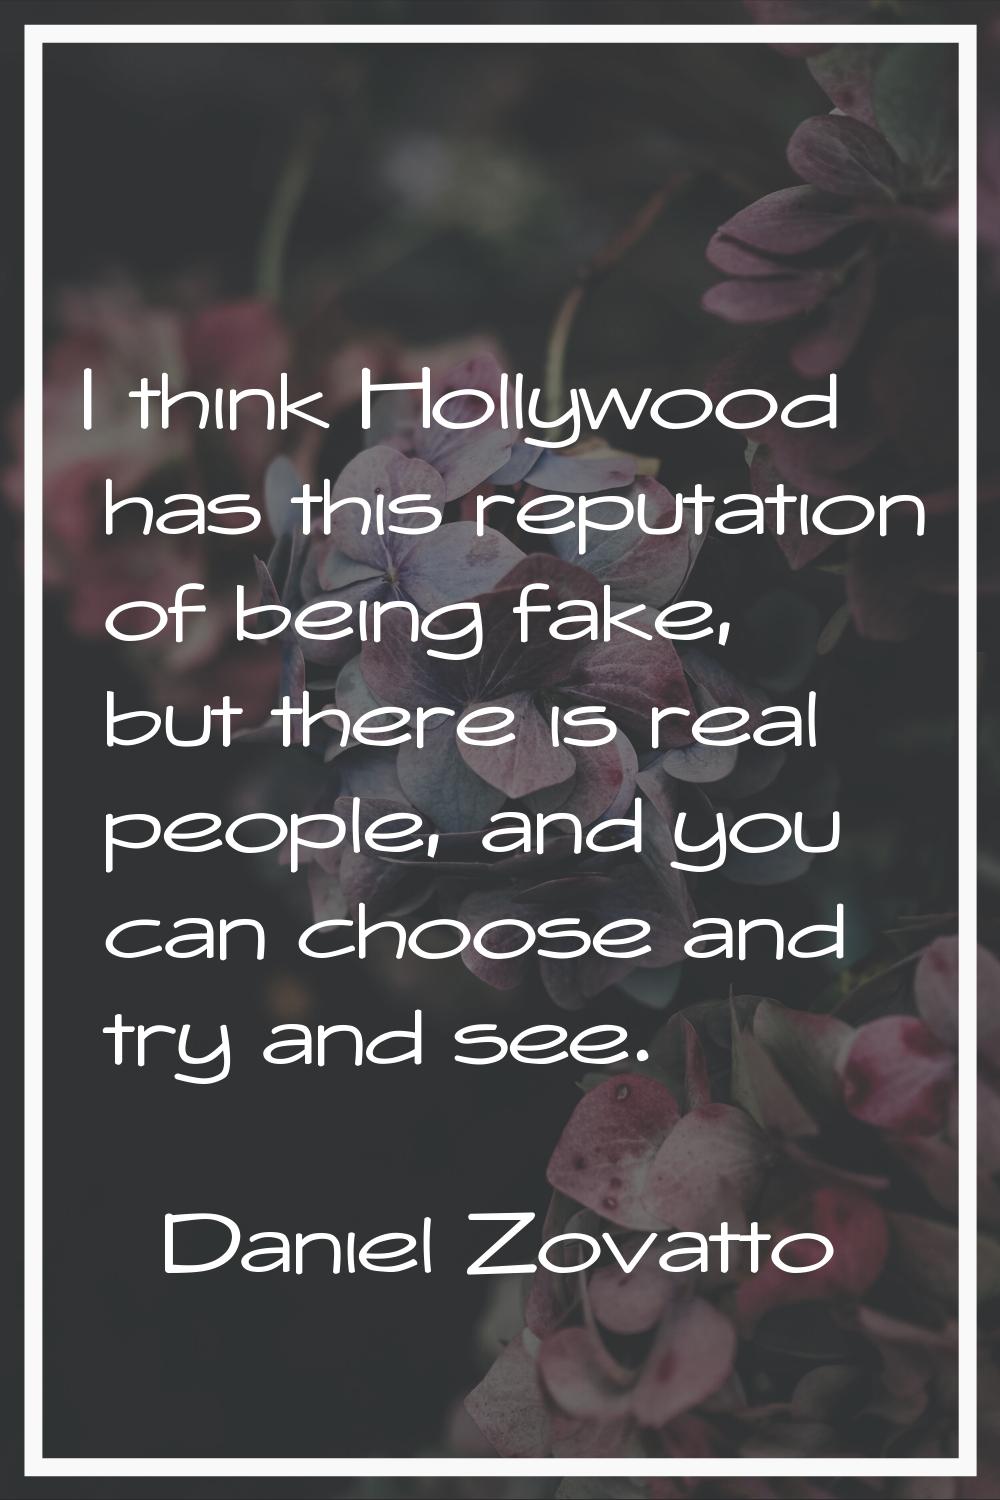 I think Hollywood has this reputation of being fake, but there is real people, and you can choose a